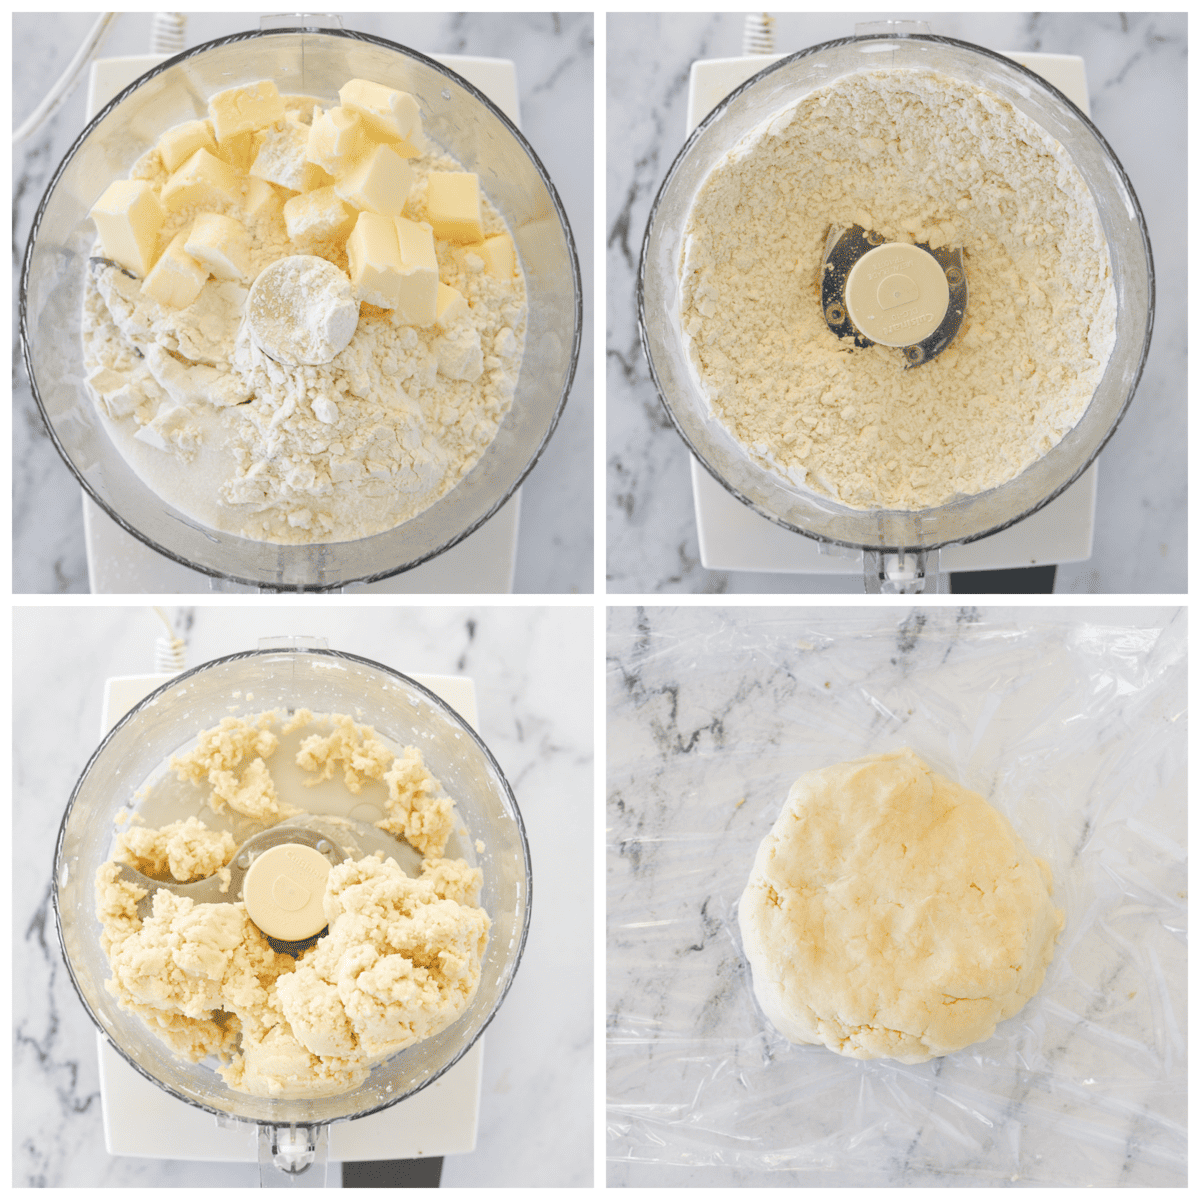 Step by step of making galette dough